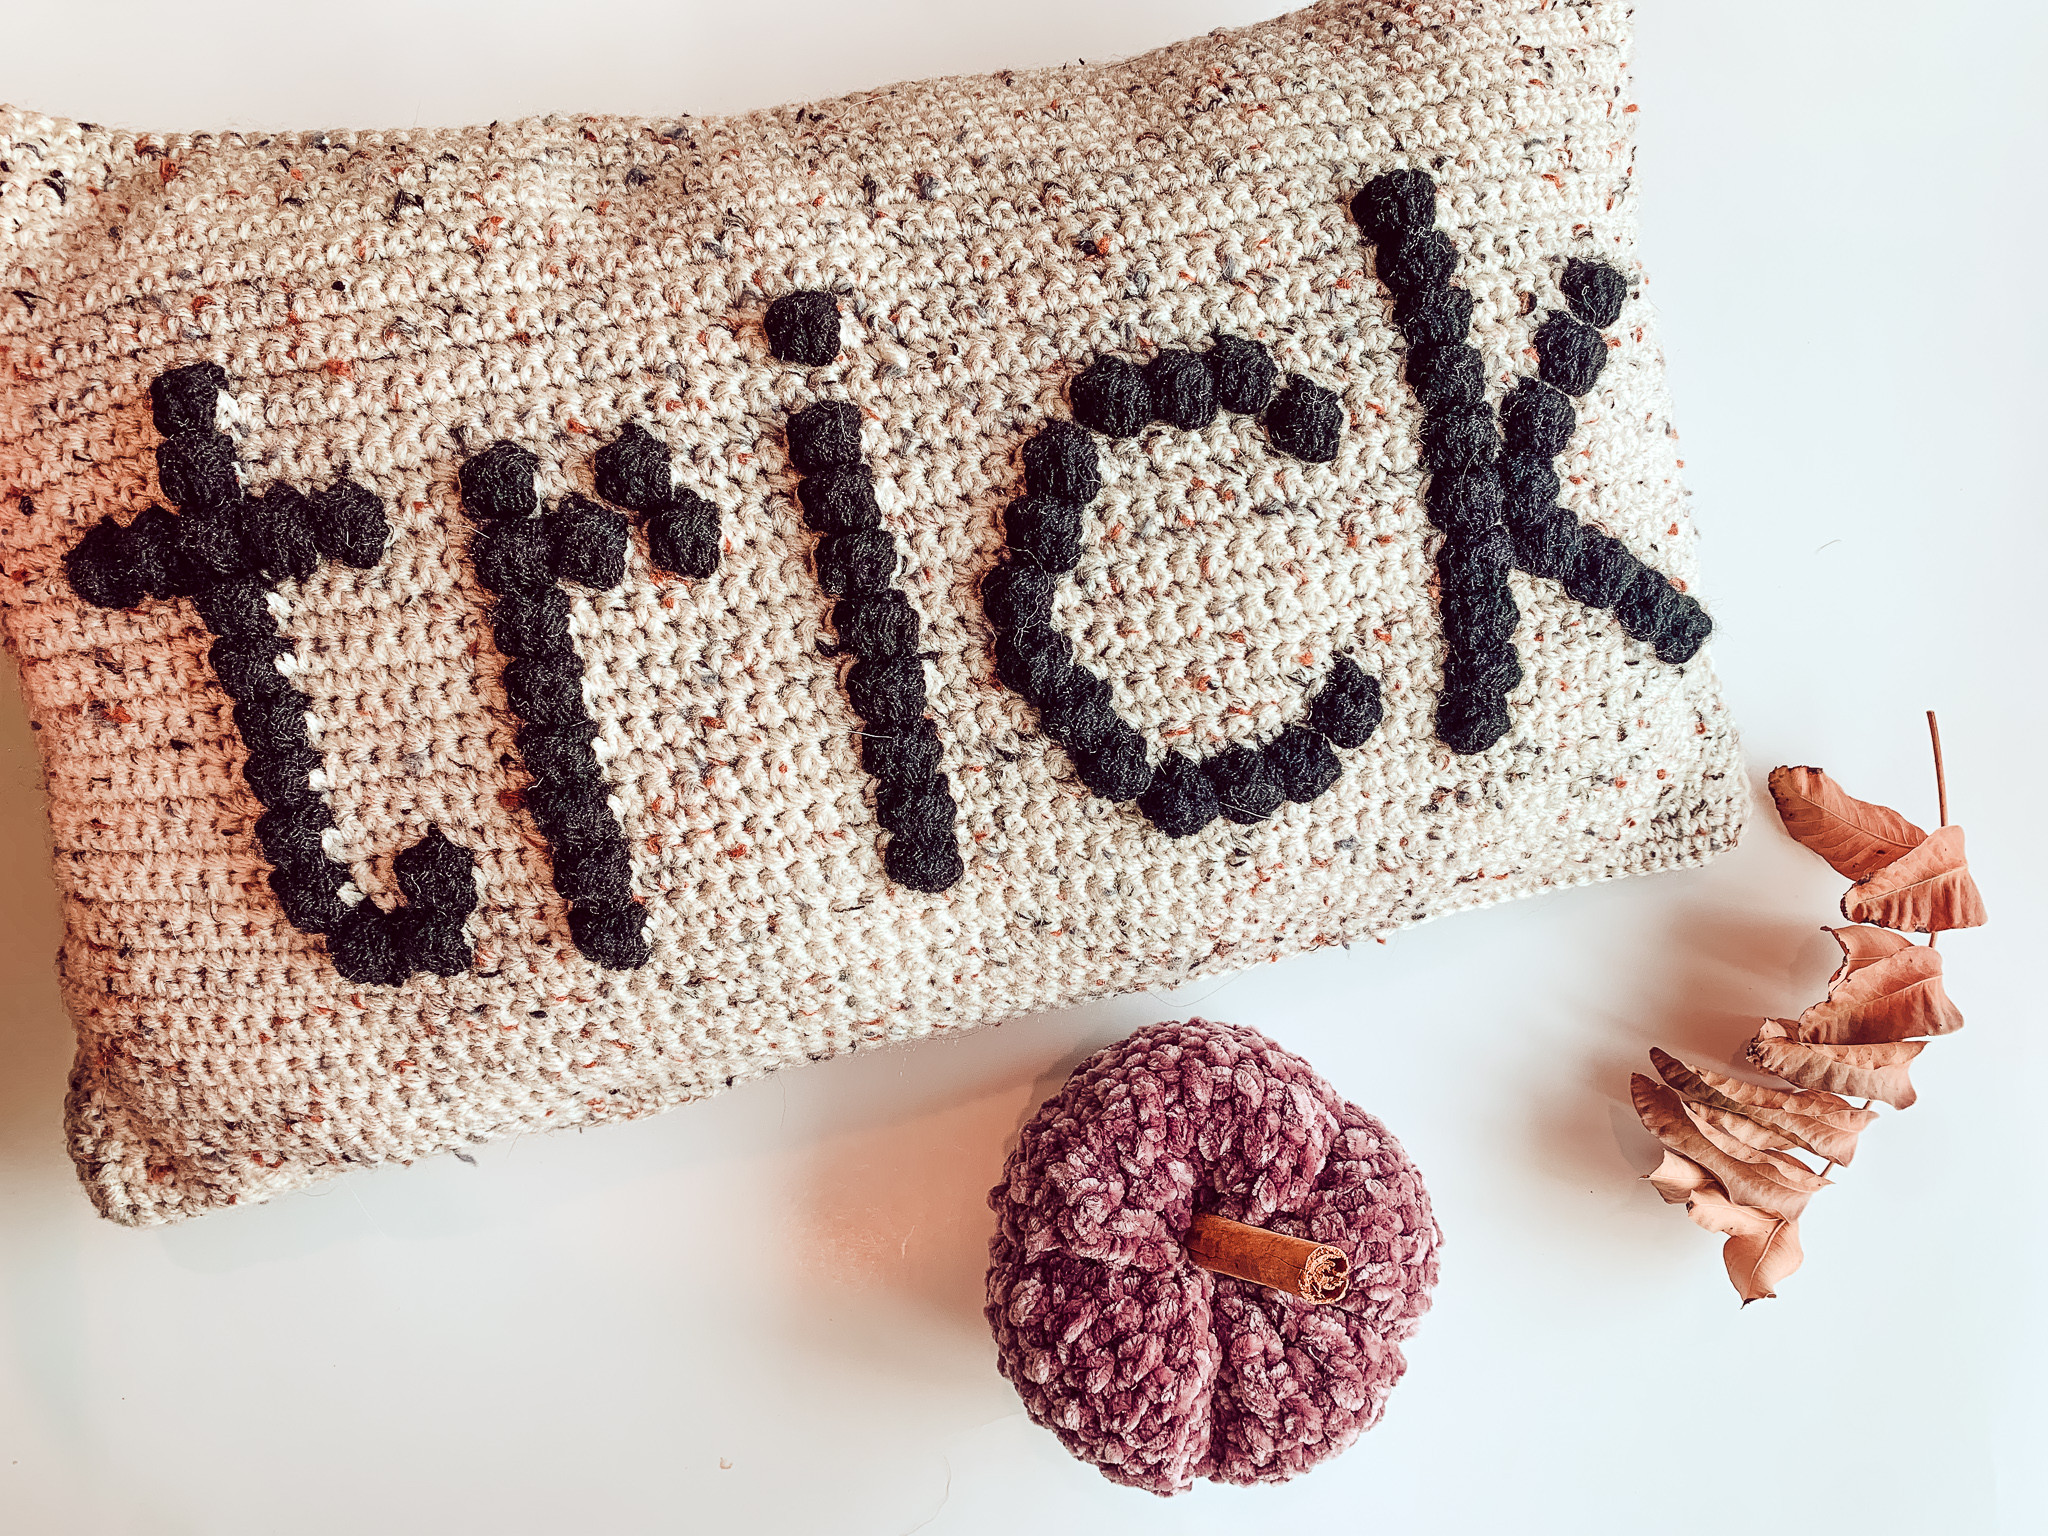 This image is of a beige crochet pillow with the word "Trick" in black yarn sitting on a white background. A purple pumpkin and some fall leaves are also in the photo.